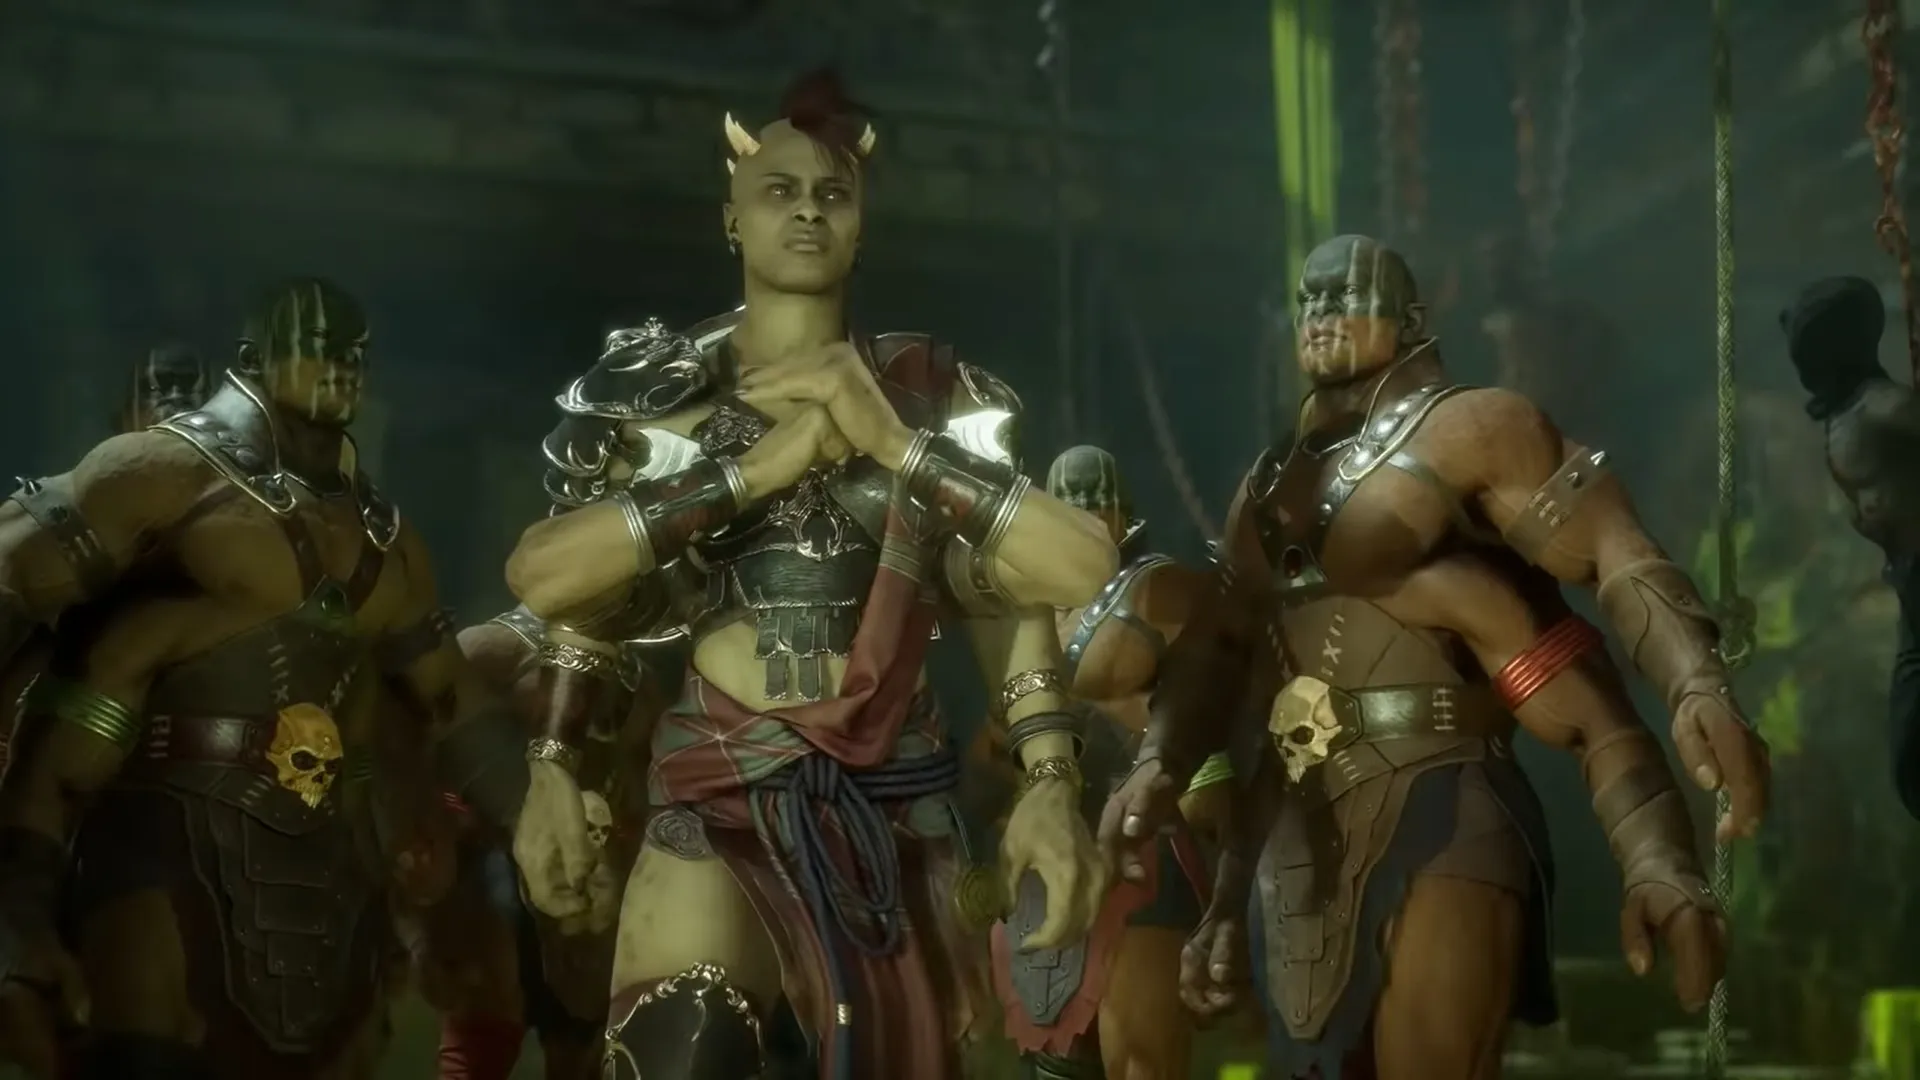 Mortal Kombat 11 Aftermath New Characters Stand Out in a Trailer